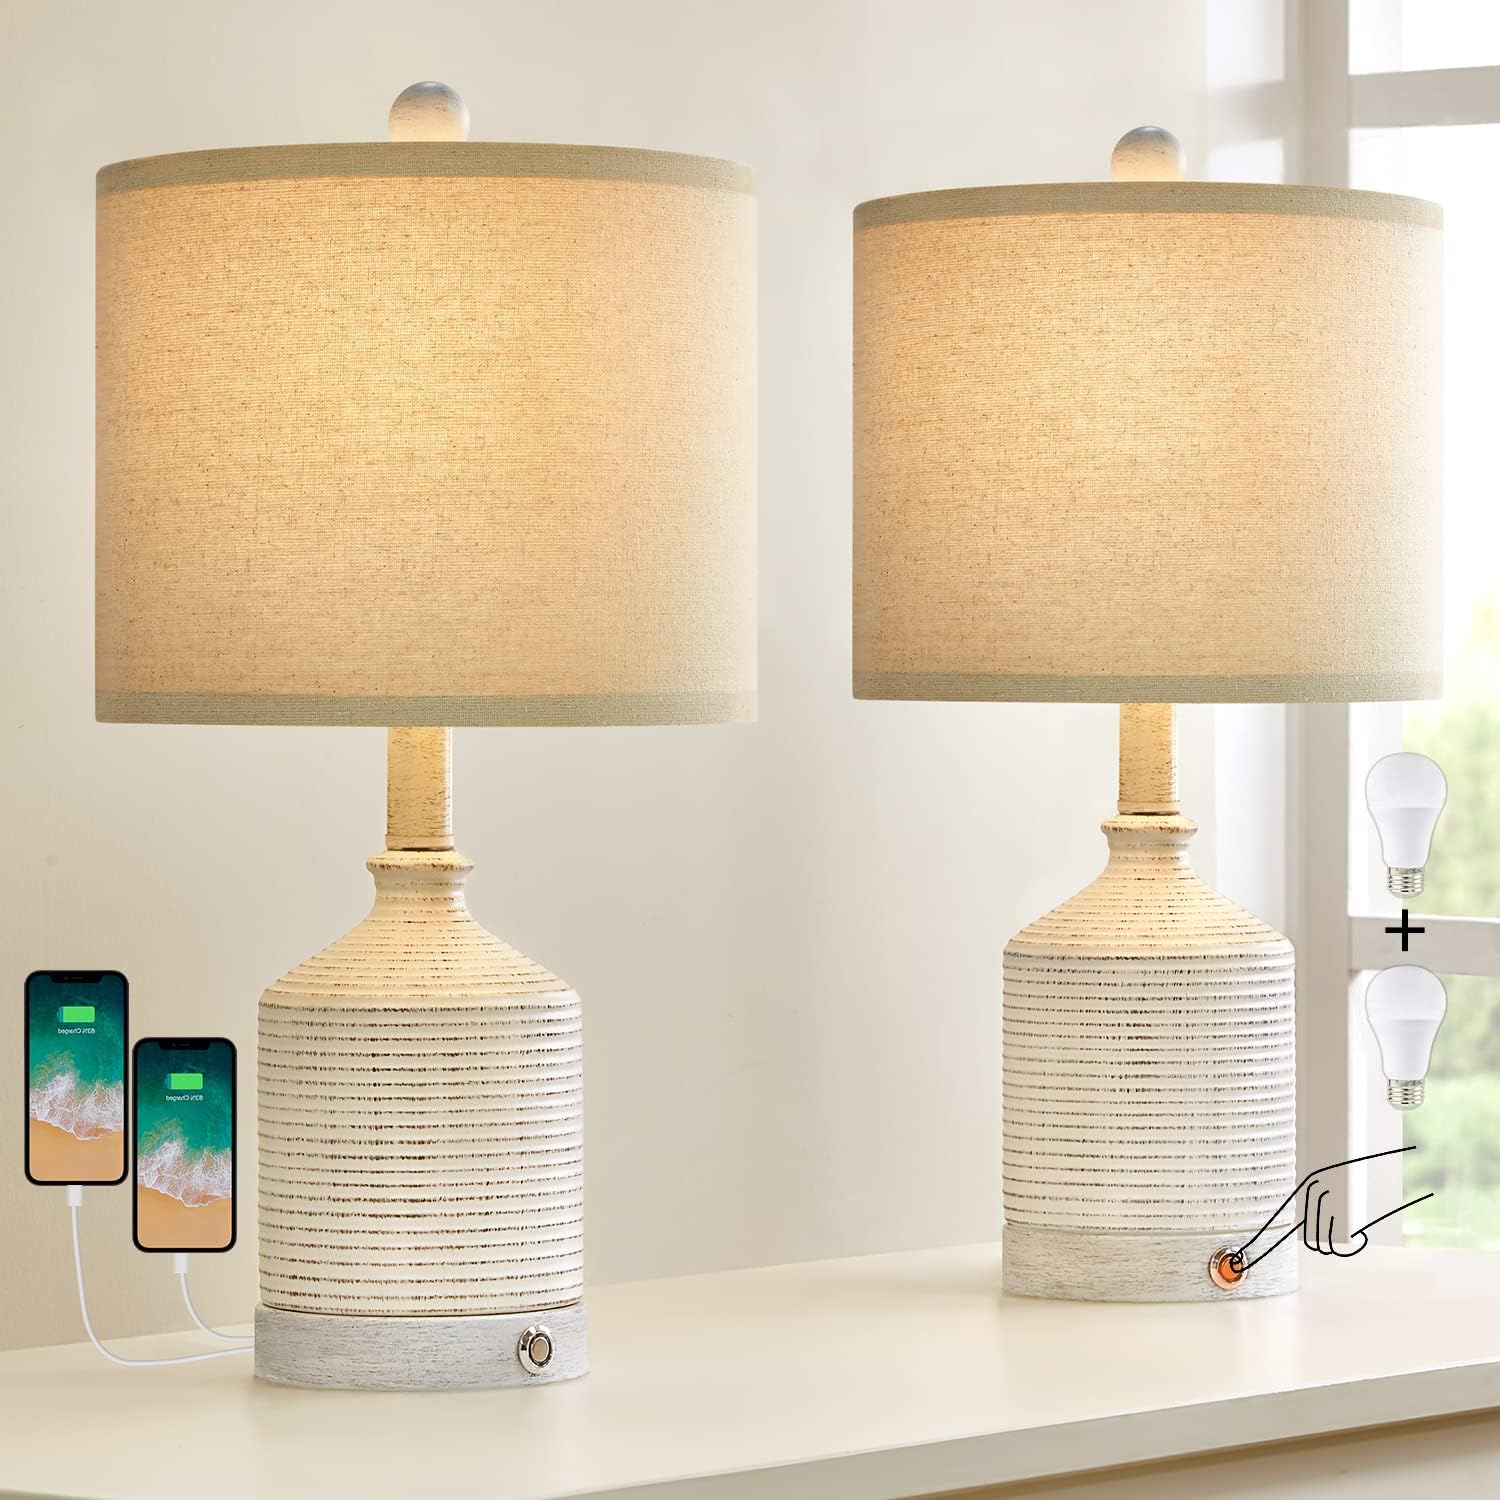 These lamps are the perfect style and size for bed side tables. My one base came damaged (the dimmer button didnt work) but the seller was quick to respond and send out a new one. ( Thanks Lucy!) they have a few different brightness levels and the usb port is clutch